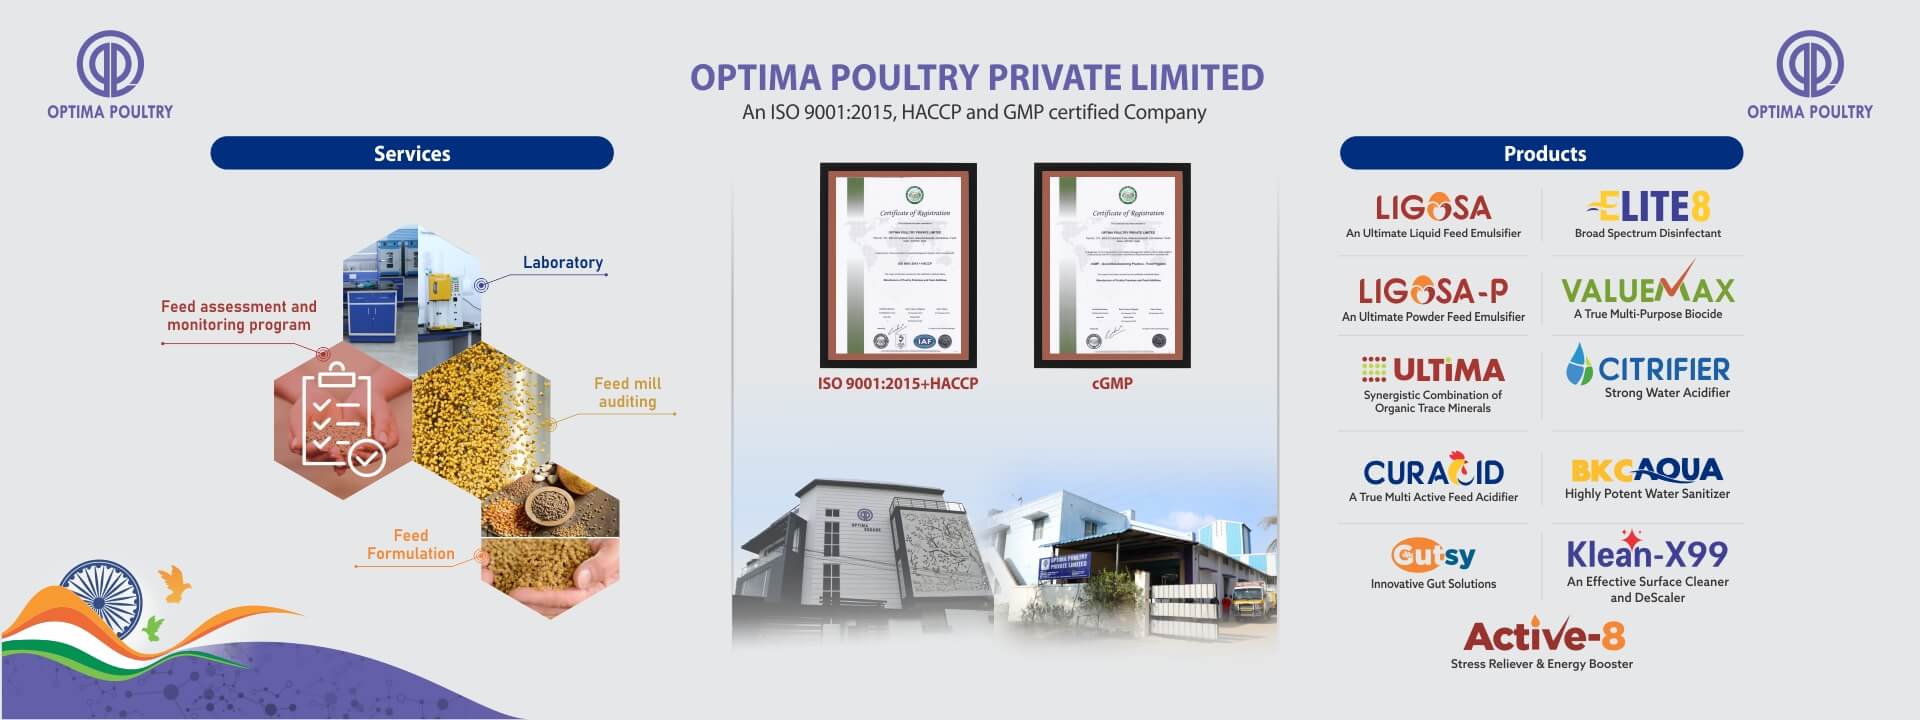 optima poultry feed mill laboratory